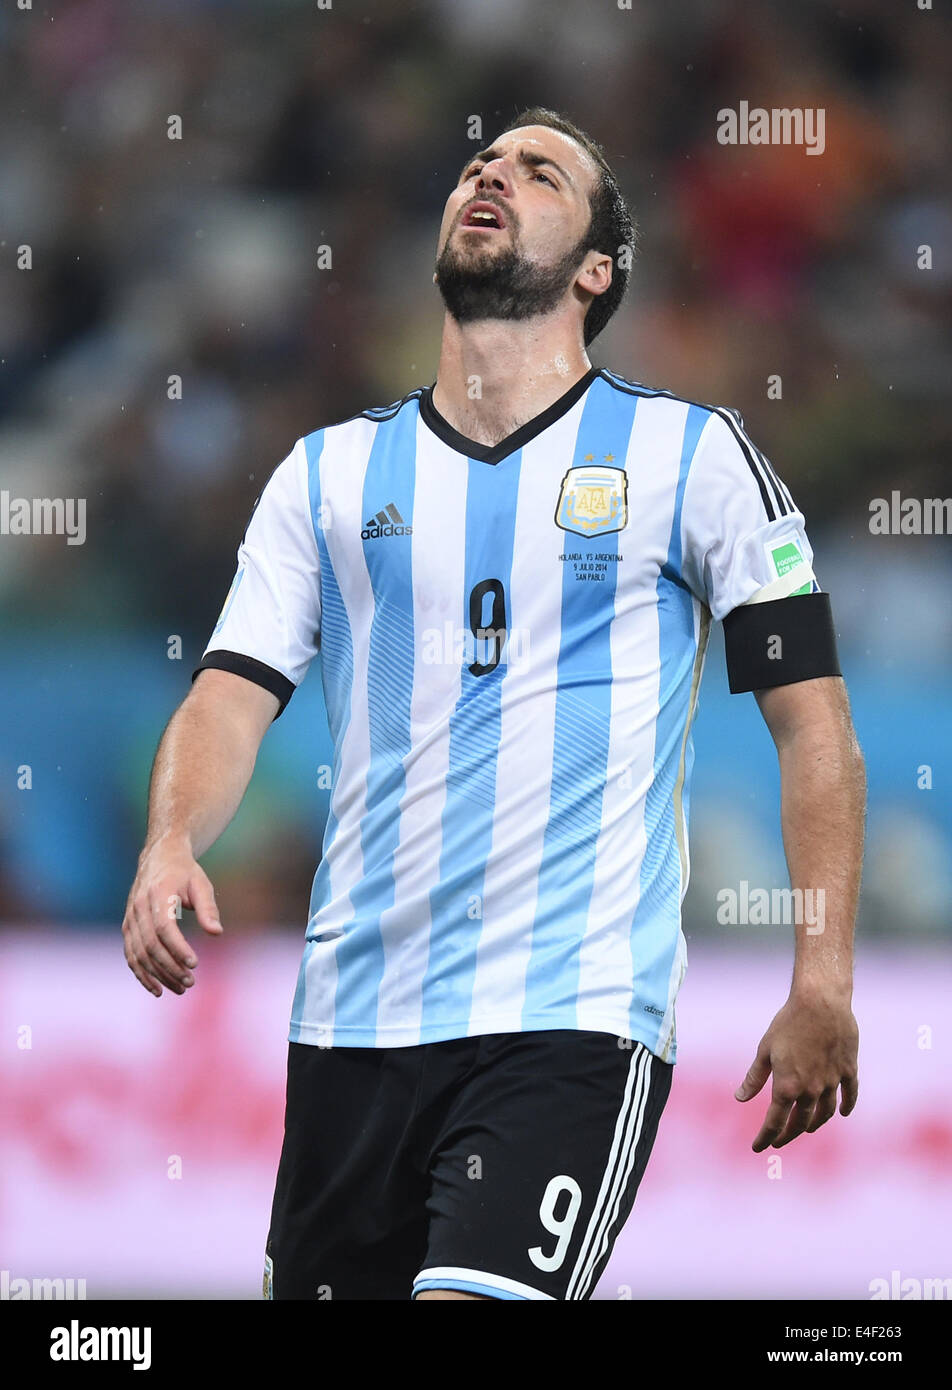 Sao Paulo, Brazil. 09th July, 2014. Gonzalo Higuain of Argentina reacts during the FIFA World Cup 2014 semi-final soccer match between the Netherlands and Argentina at the Arena Corinthians in Sao Paulo, Brazil, 09 July 2014. Photo: Marius Becker/dpa/Alamy Live News Stock Photo